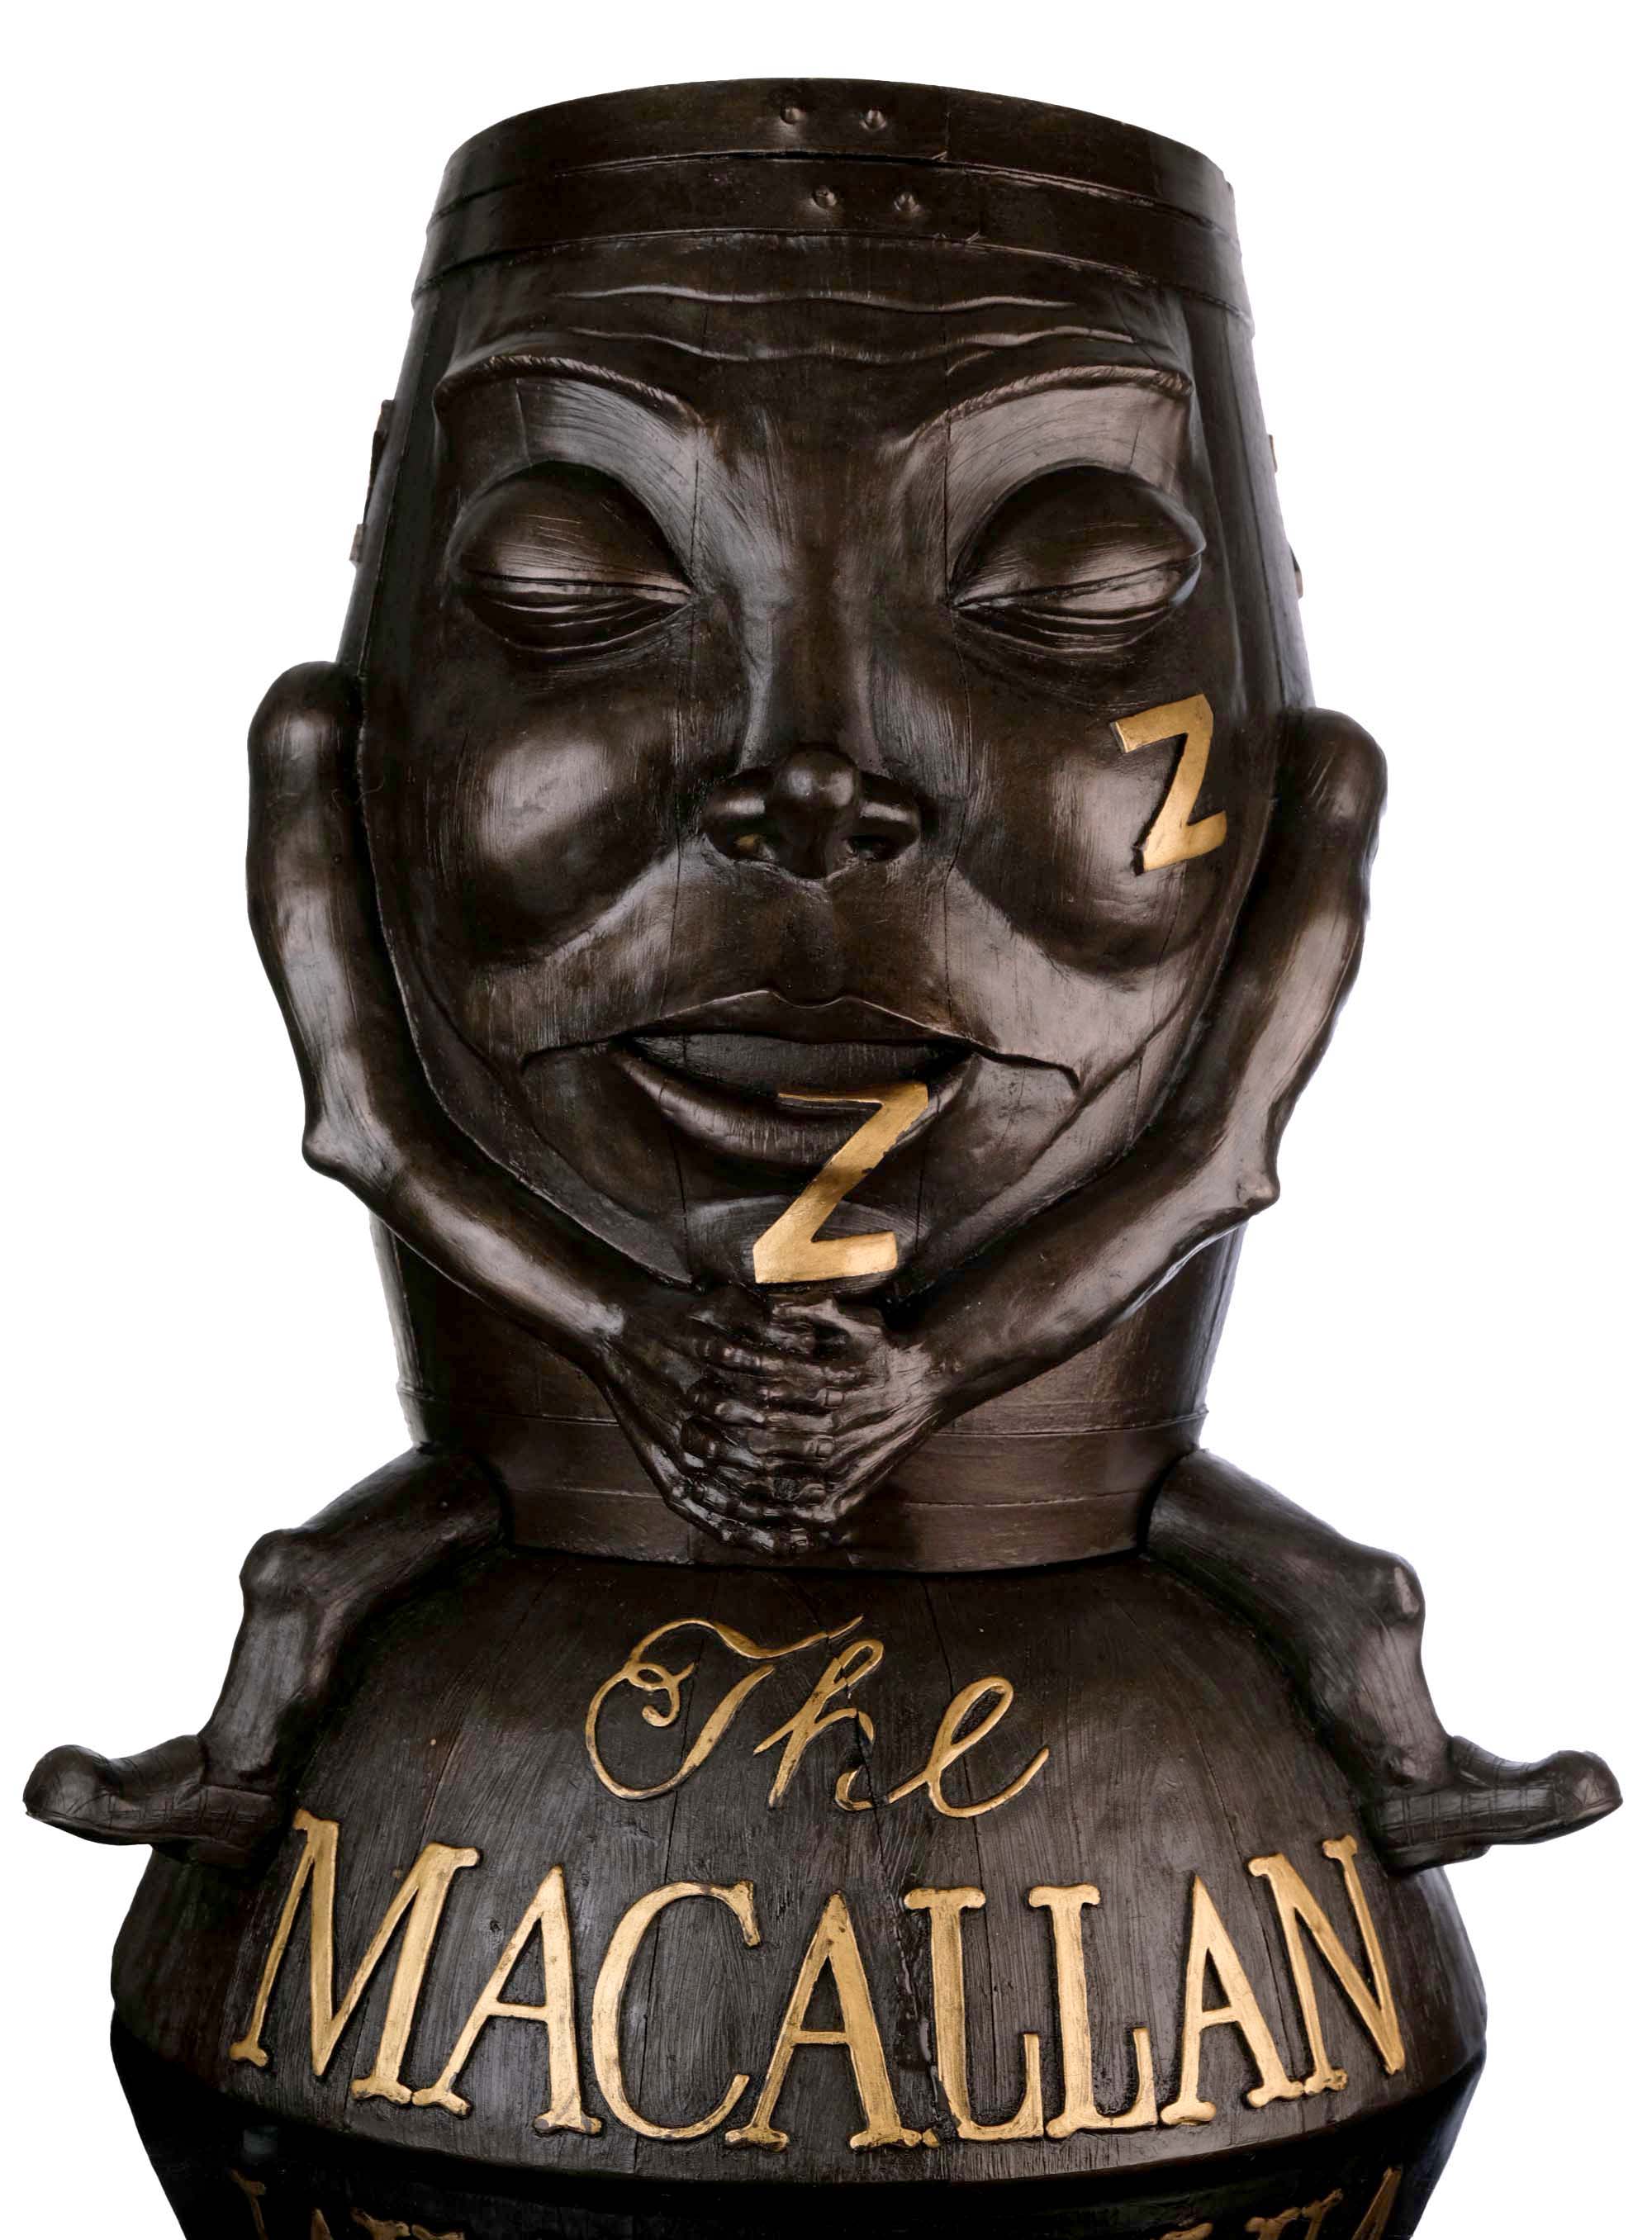 Macallan Sleeping Cask 167 - Limited Edition display Stand